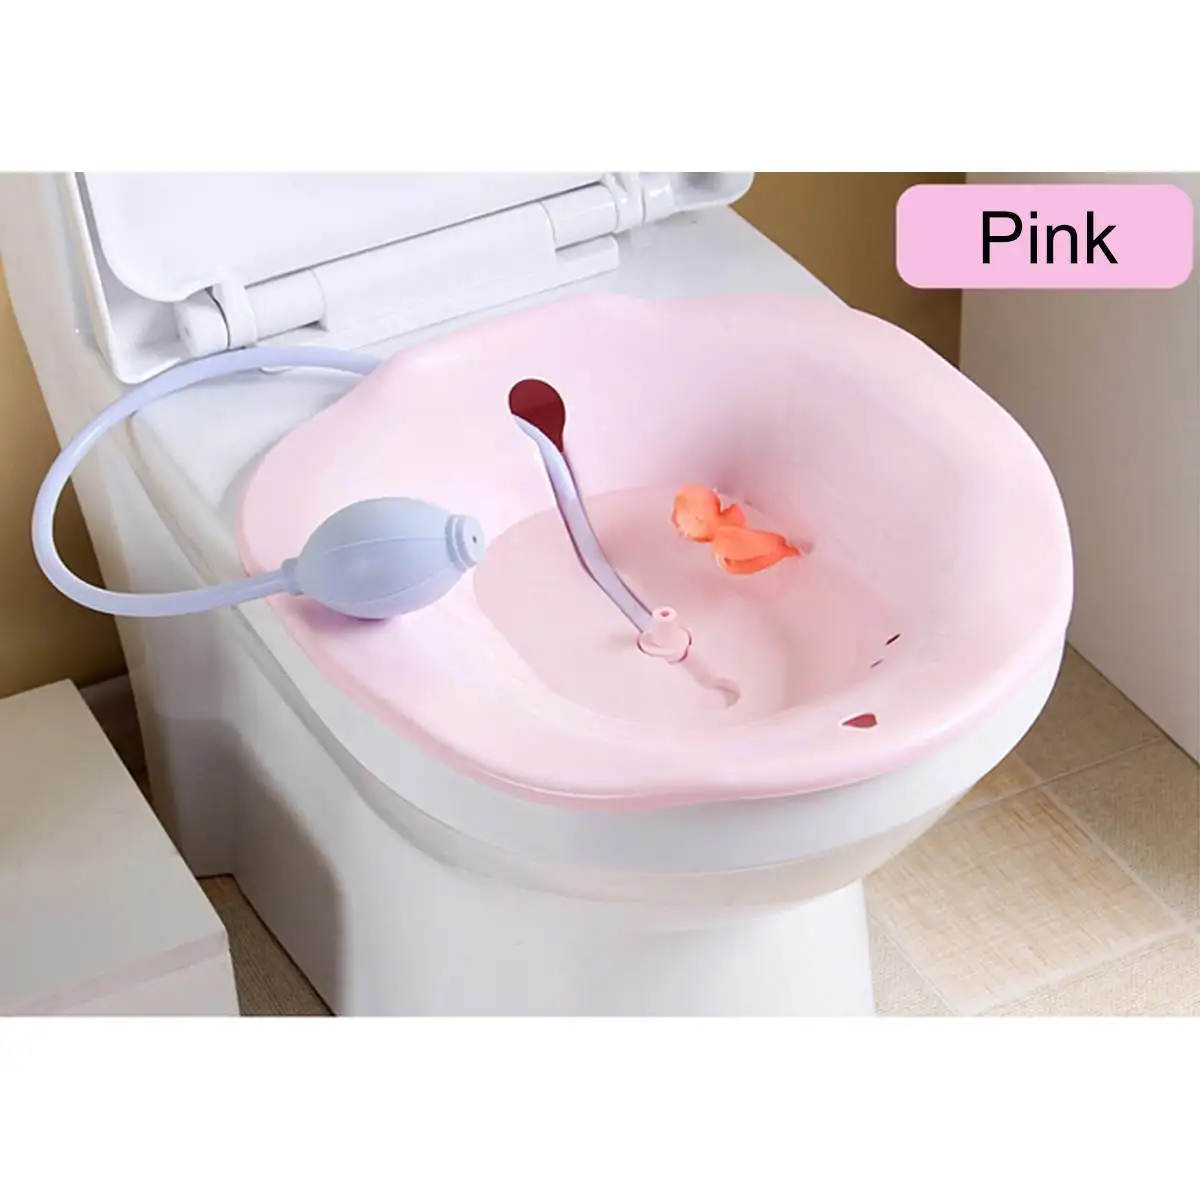 1pc Monther Care Portable Newborn Baby Bath Tub Babies Bathroom Baby Nursing Things For Pregnant Woman#TC